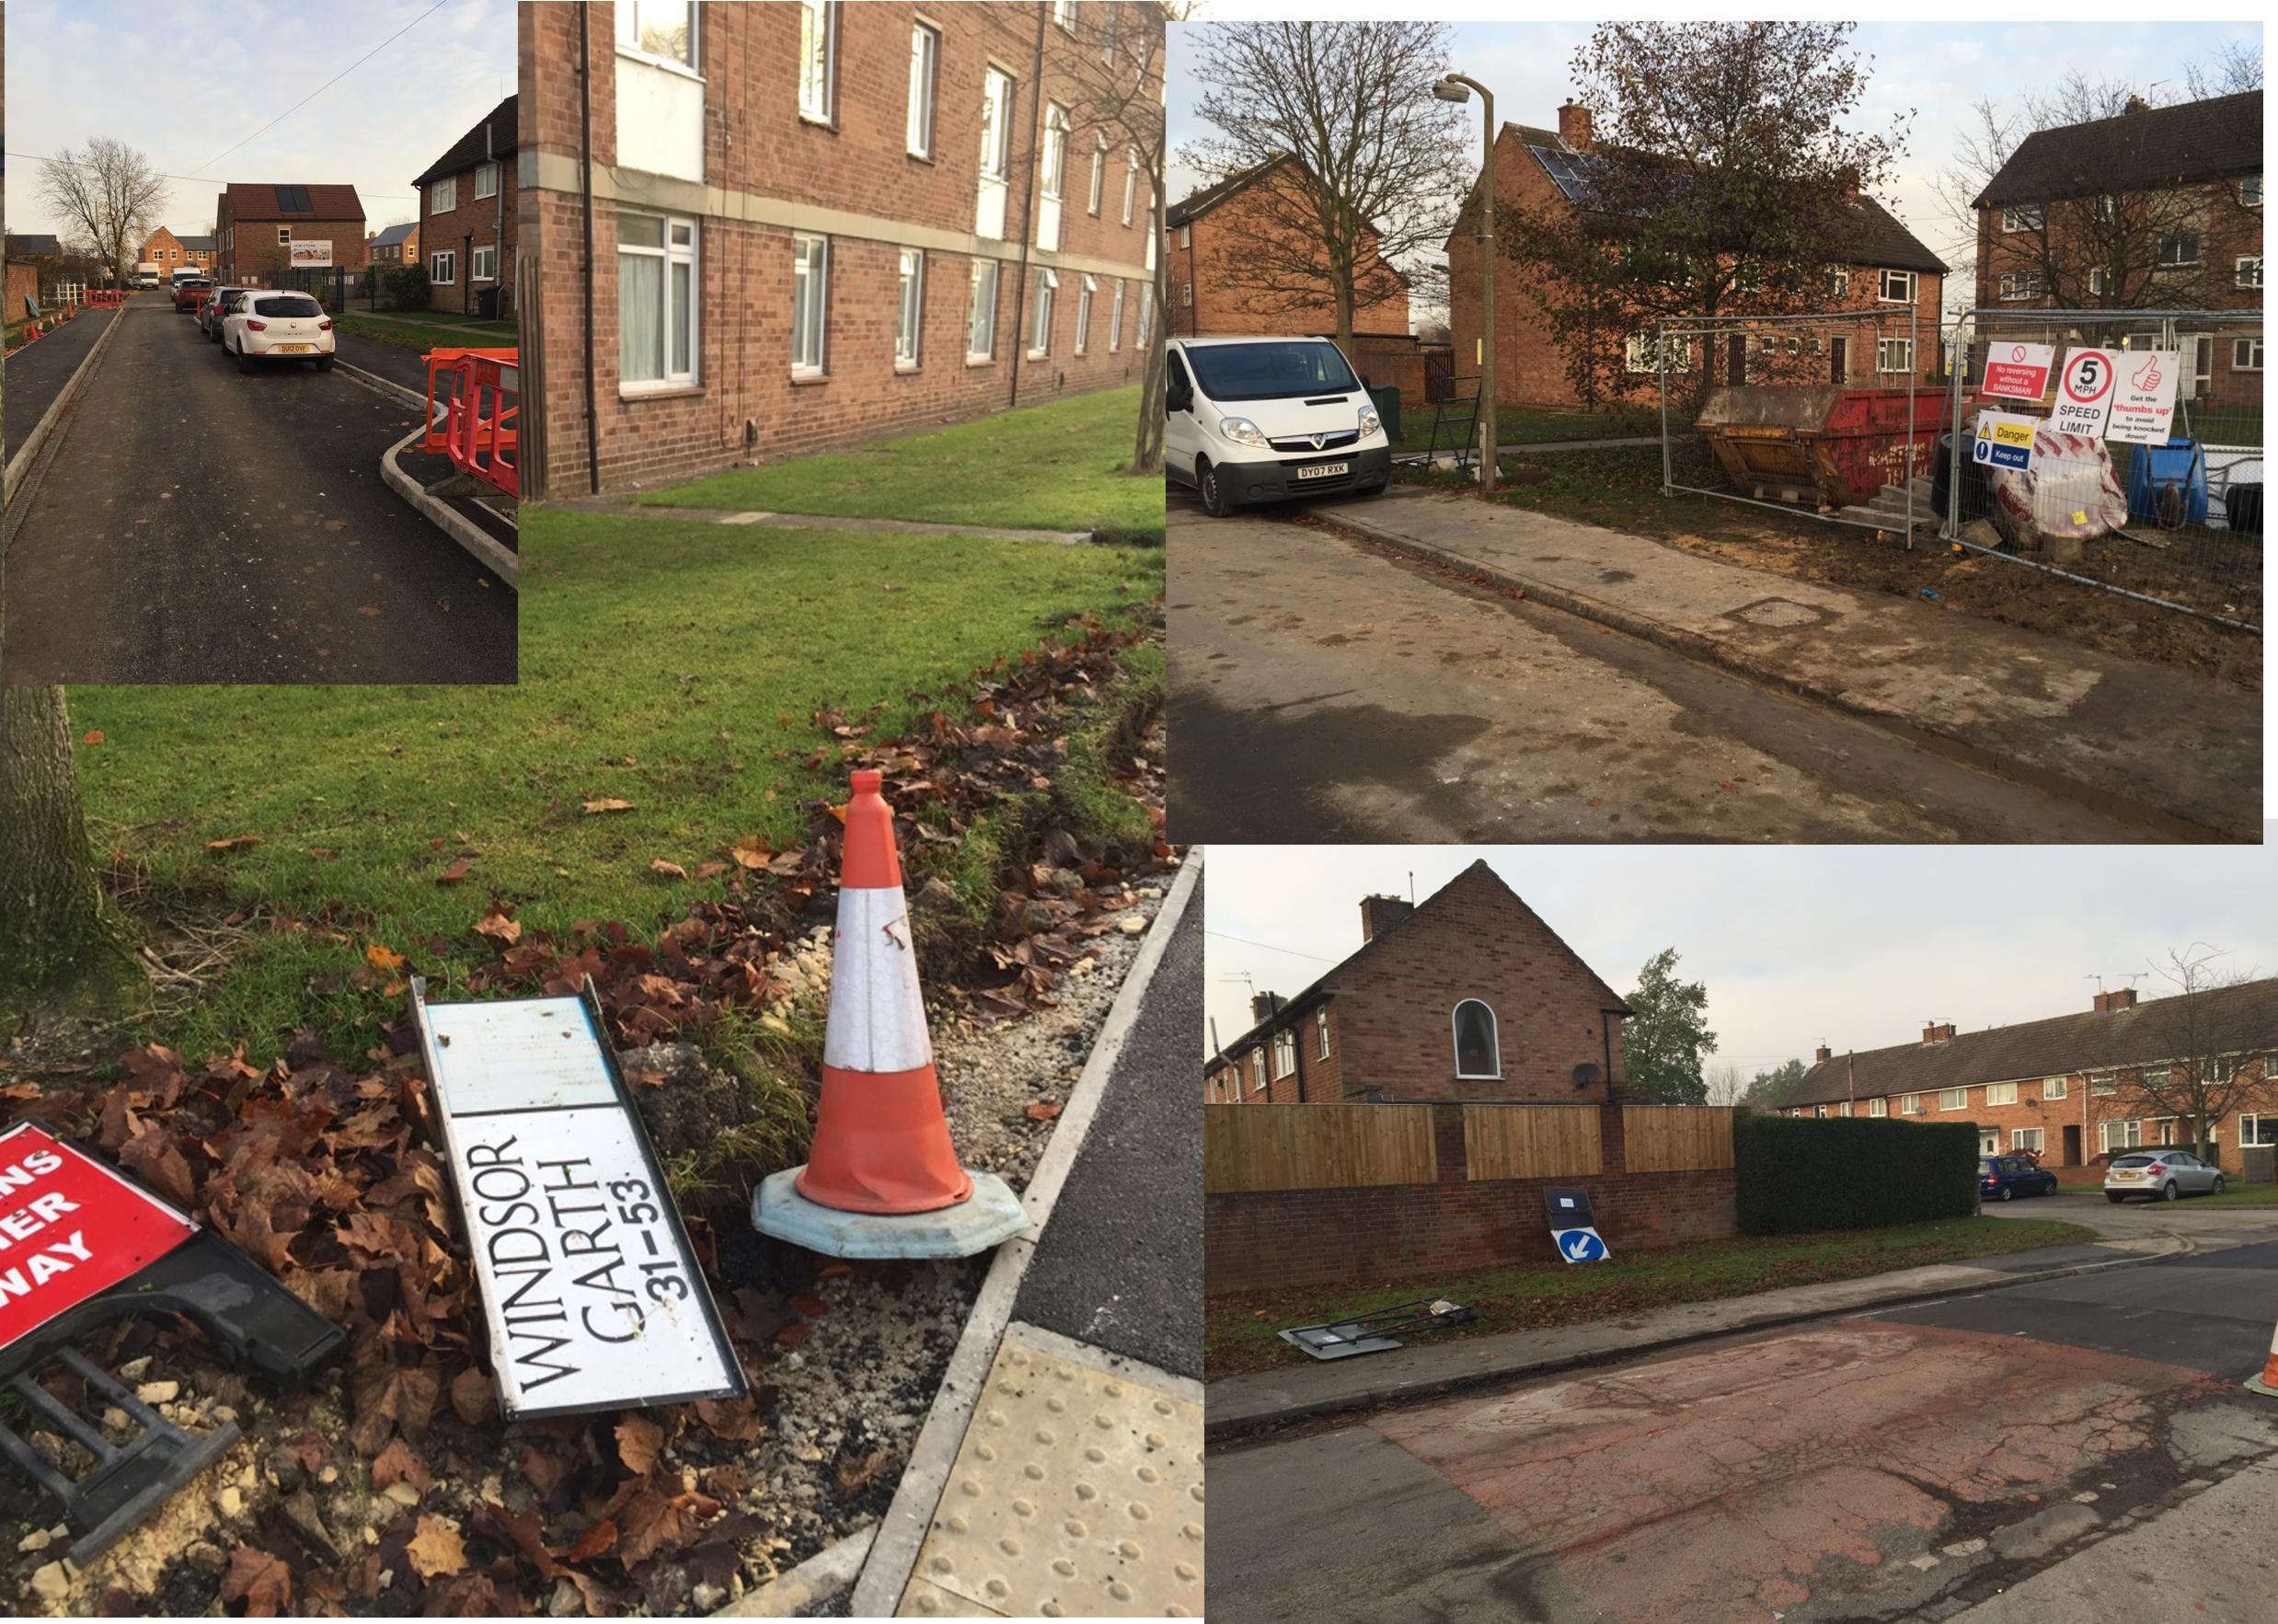 Occupants started to move into the "completed" Hob Stones development on Windsor Garth. We told the developer that there was still a lot of remedial work to do in the area on paths, roads and grassed areas.